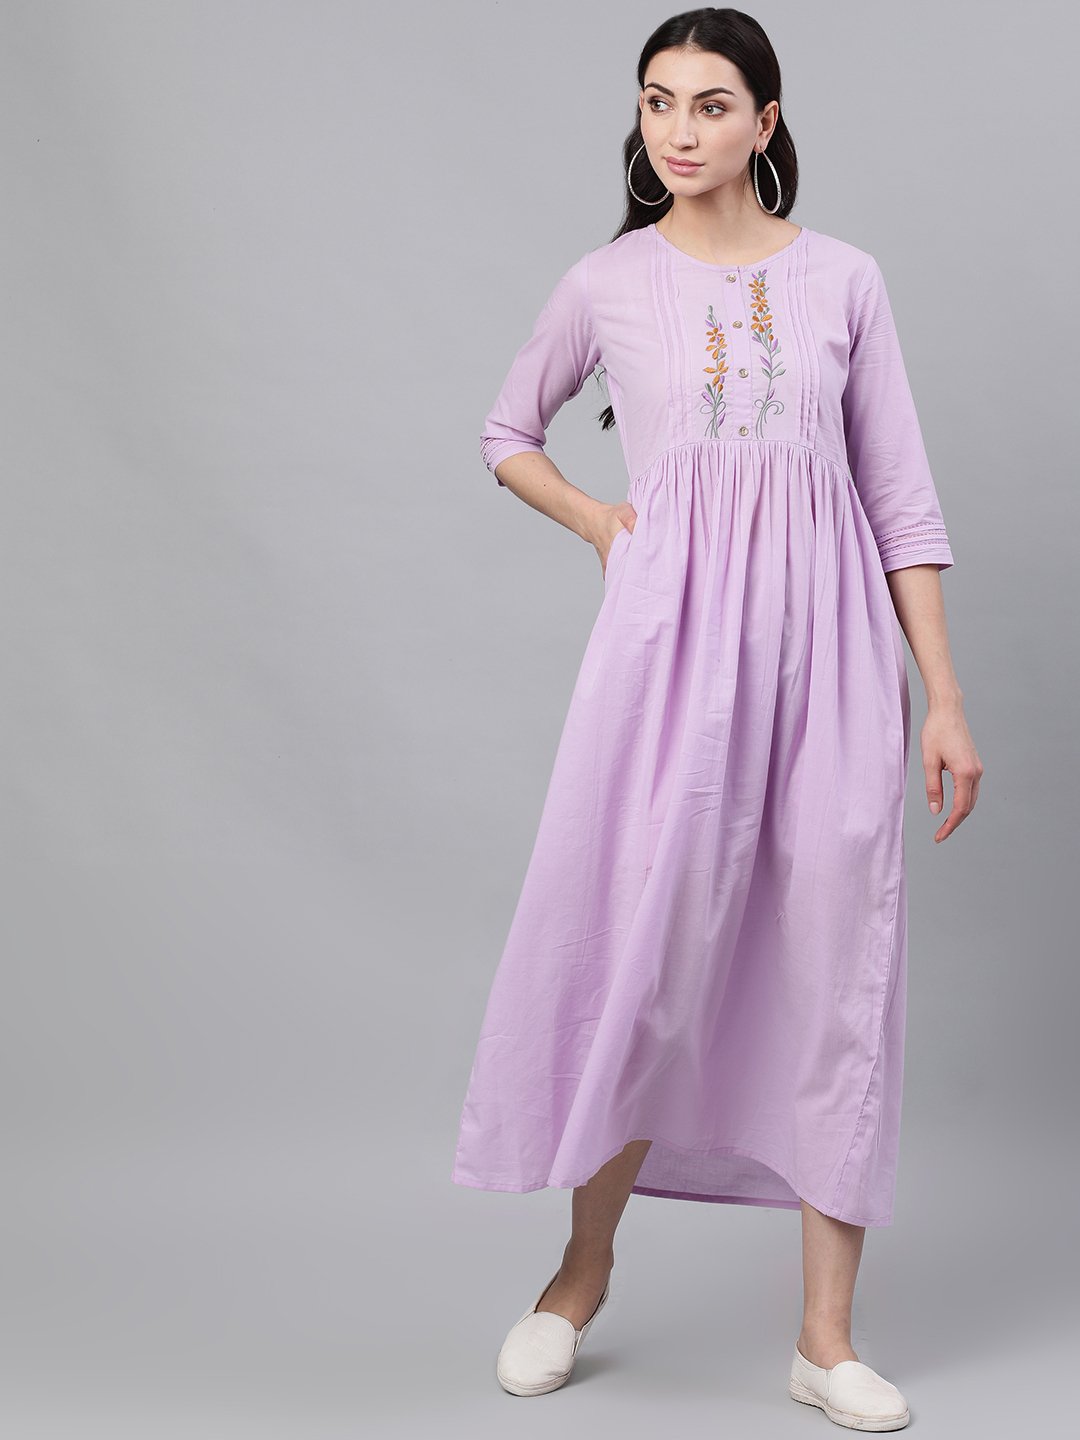 Women's Lavender Solid Solid Round Neck Cotton Maxi Dress - Nayo Clothing